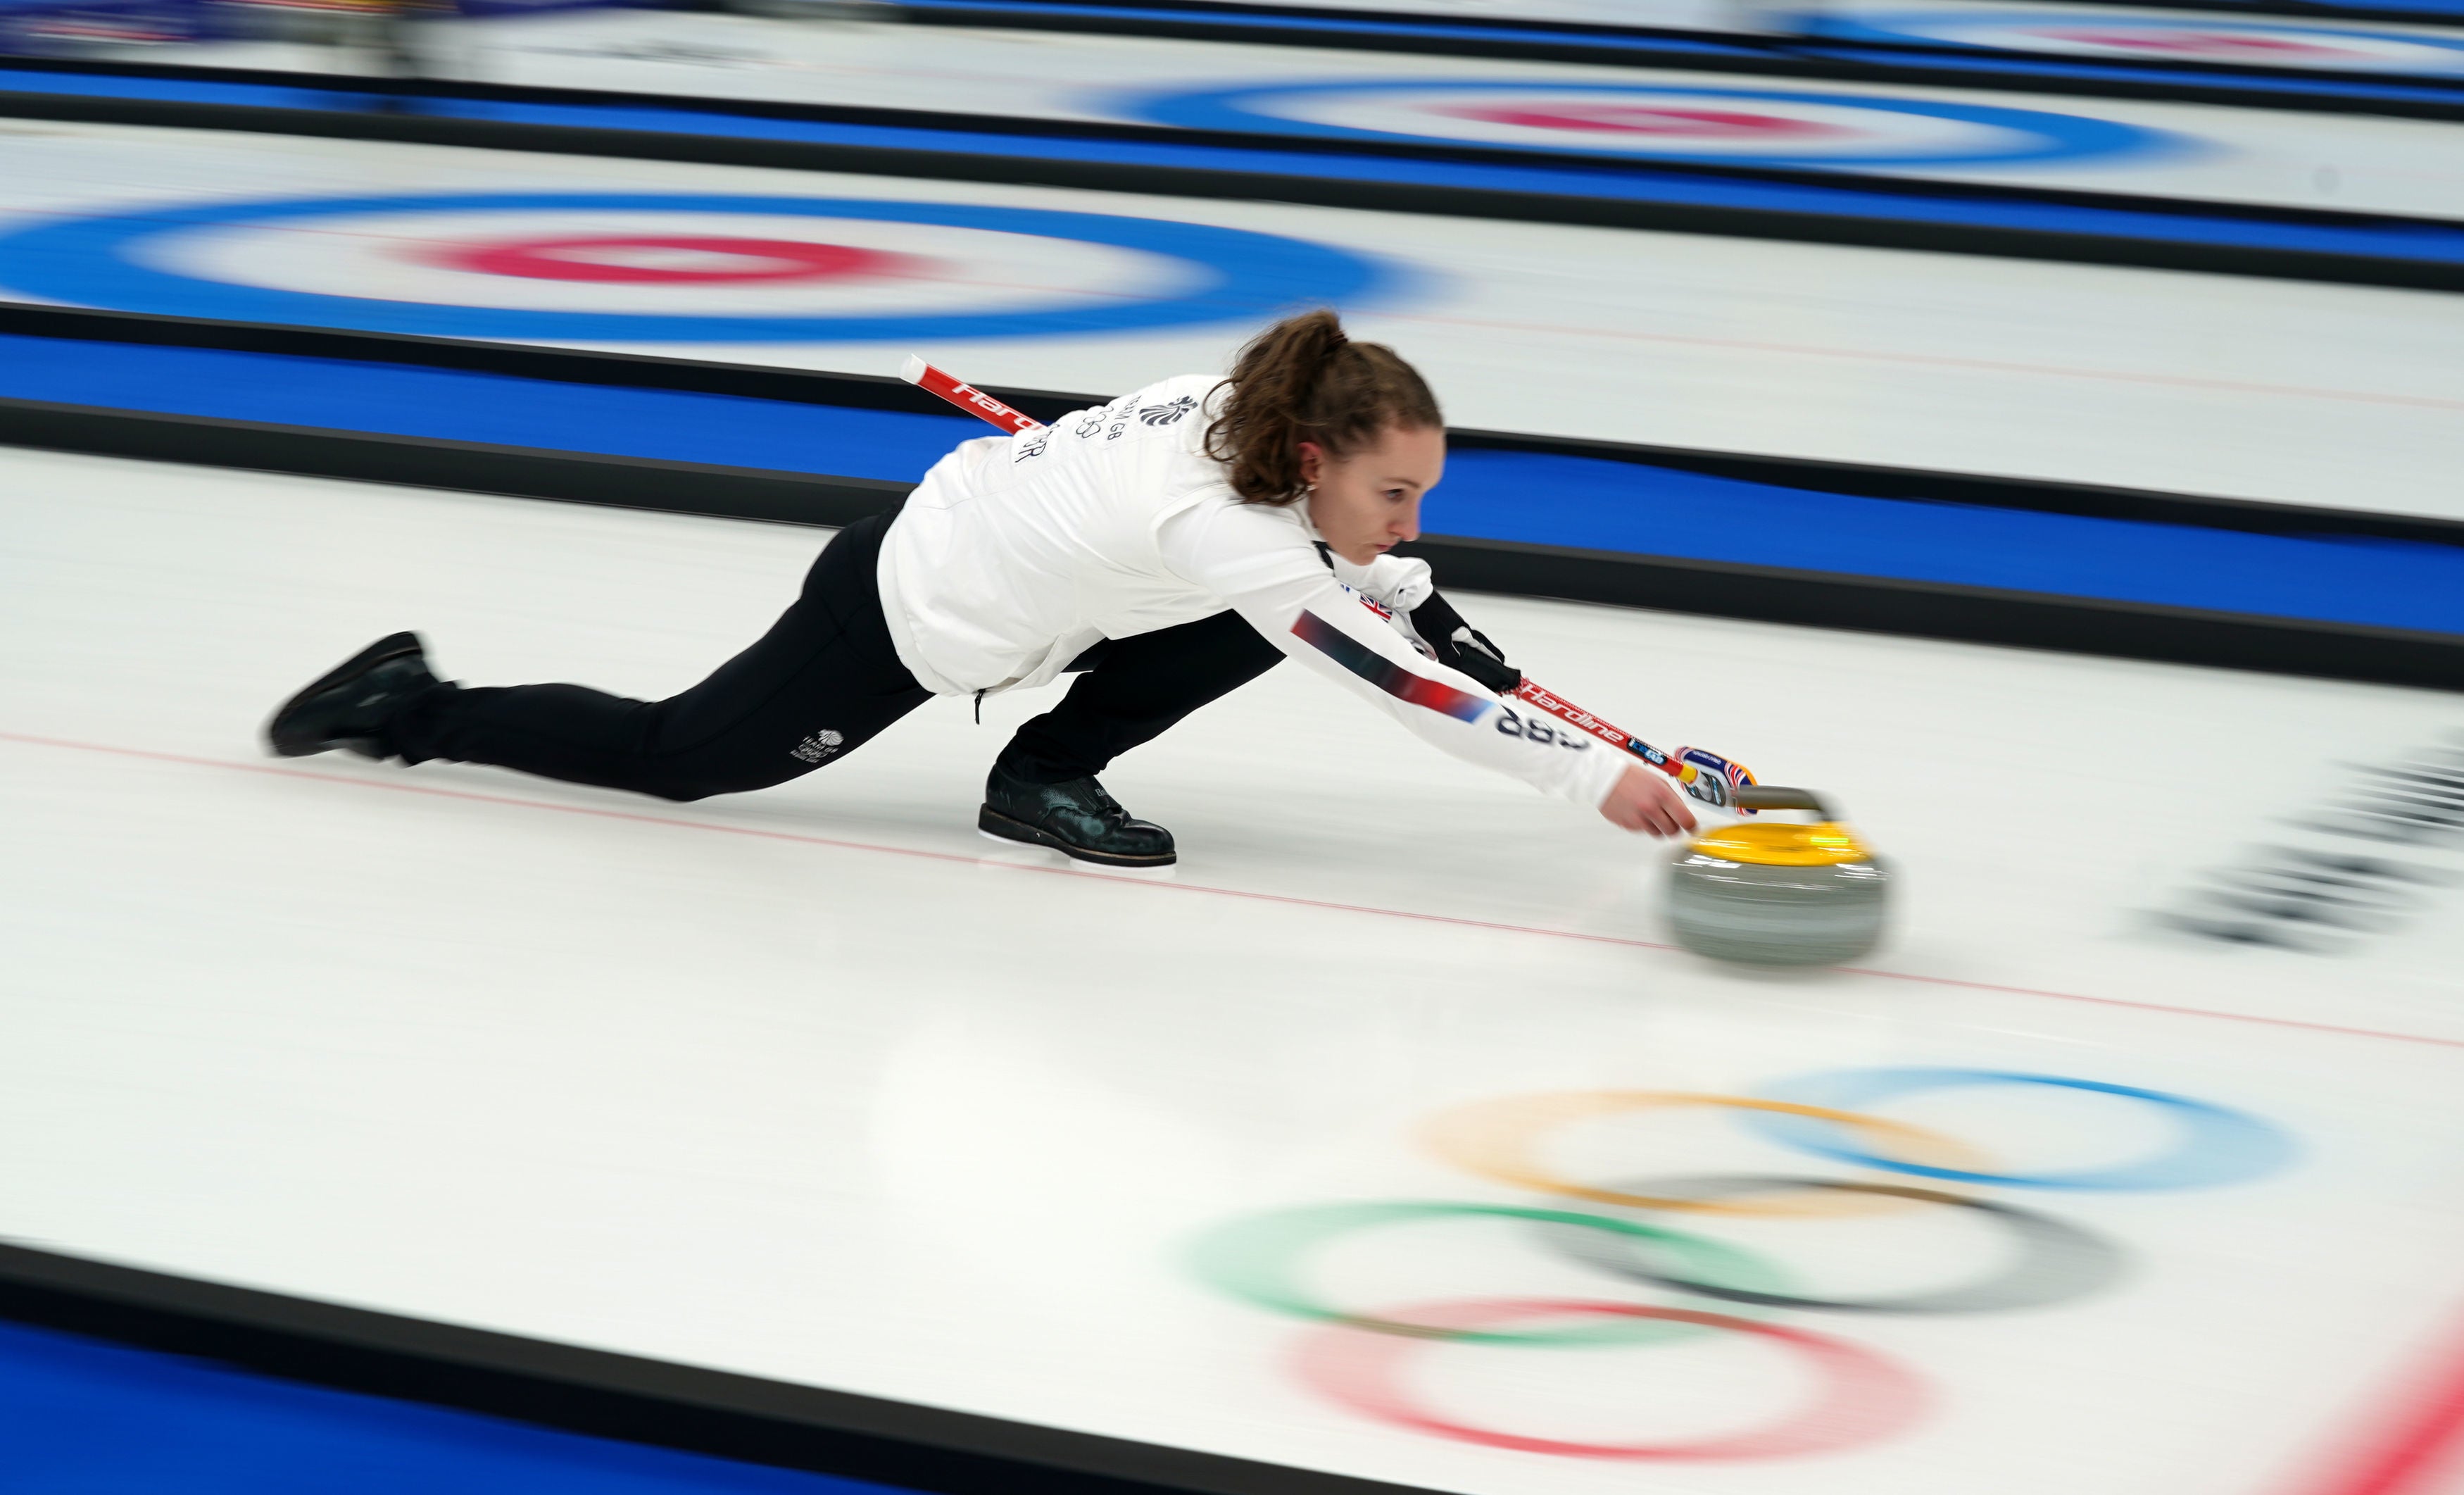 Jen Dodds launches a stone during the match against Norway